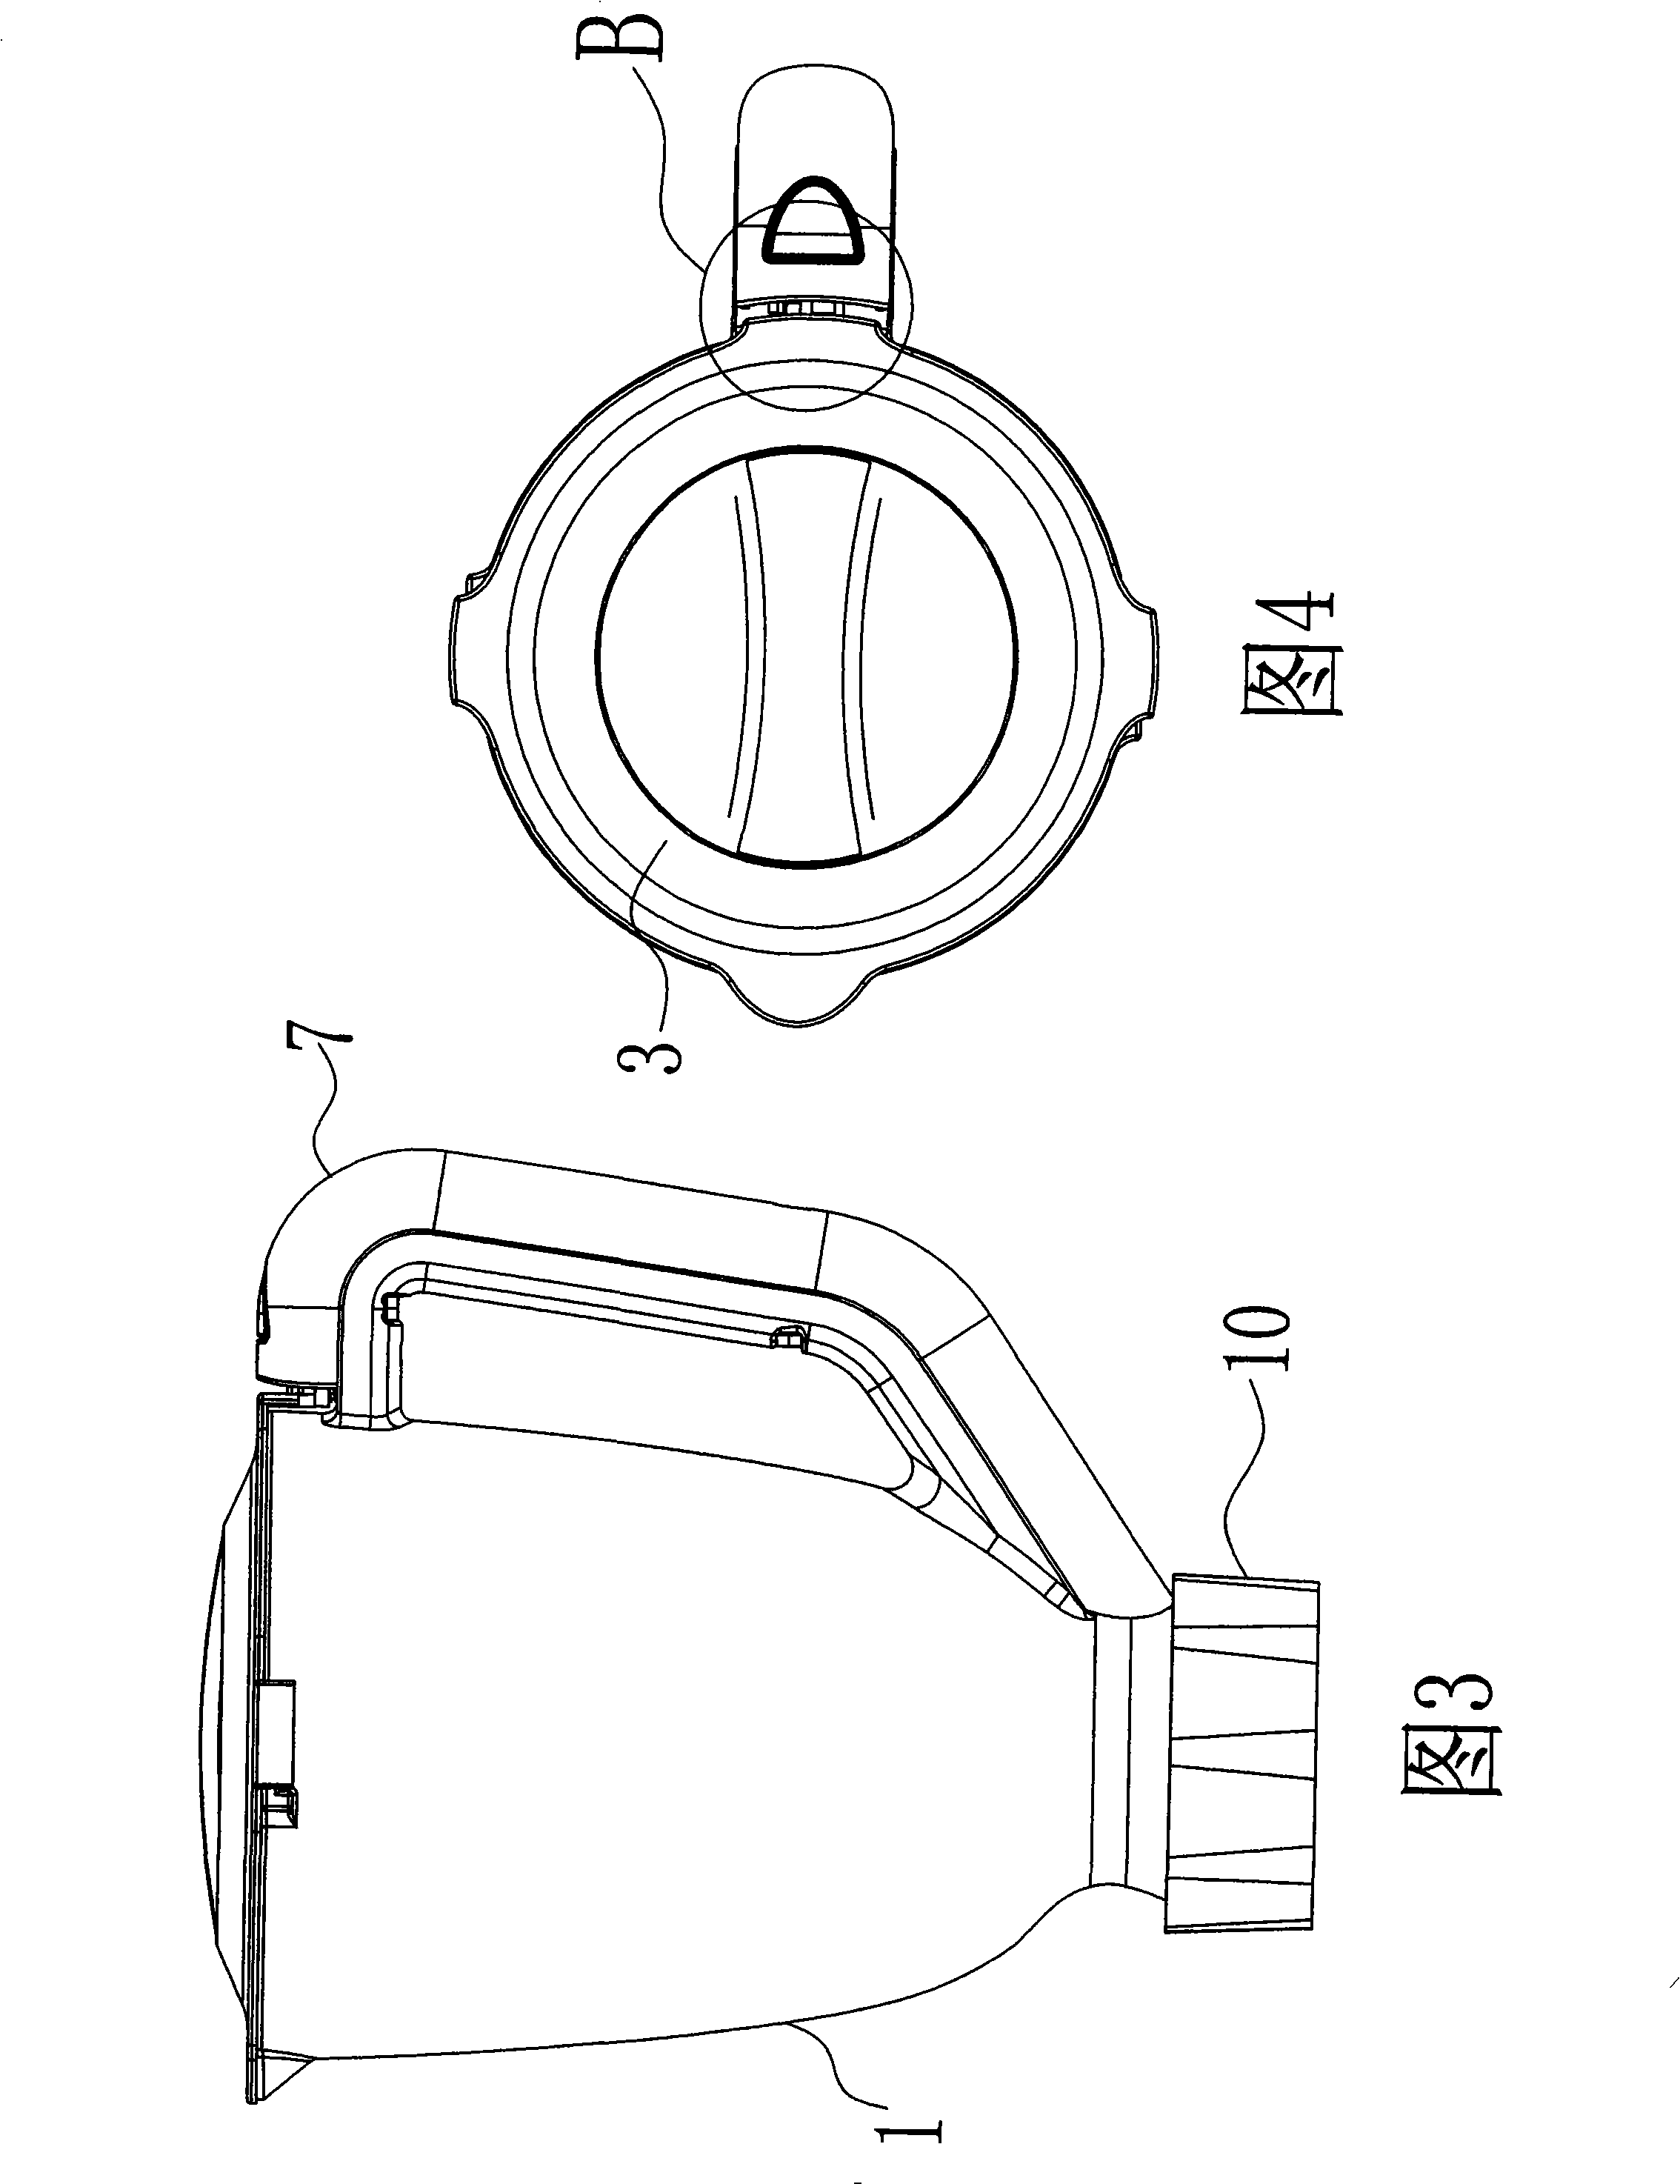 Fruit juice mixing cup link gear and link method